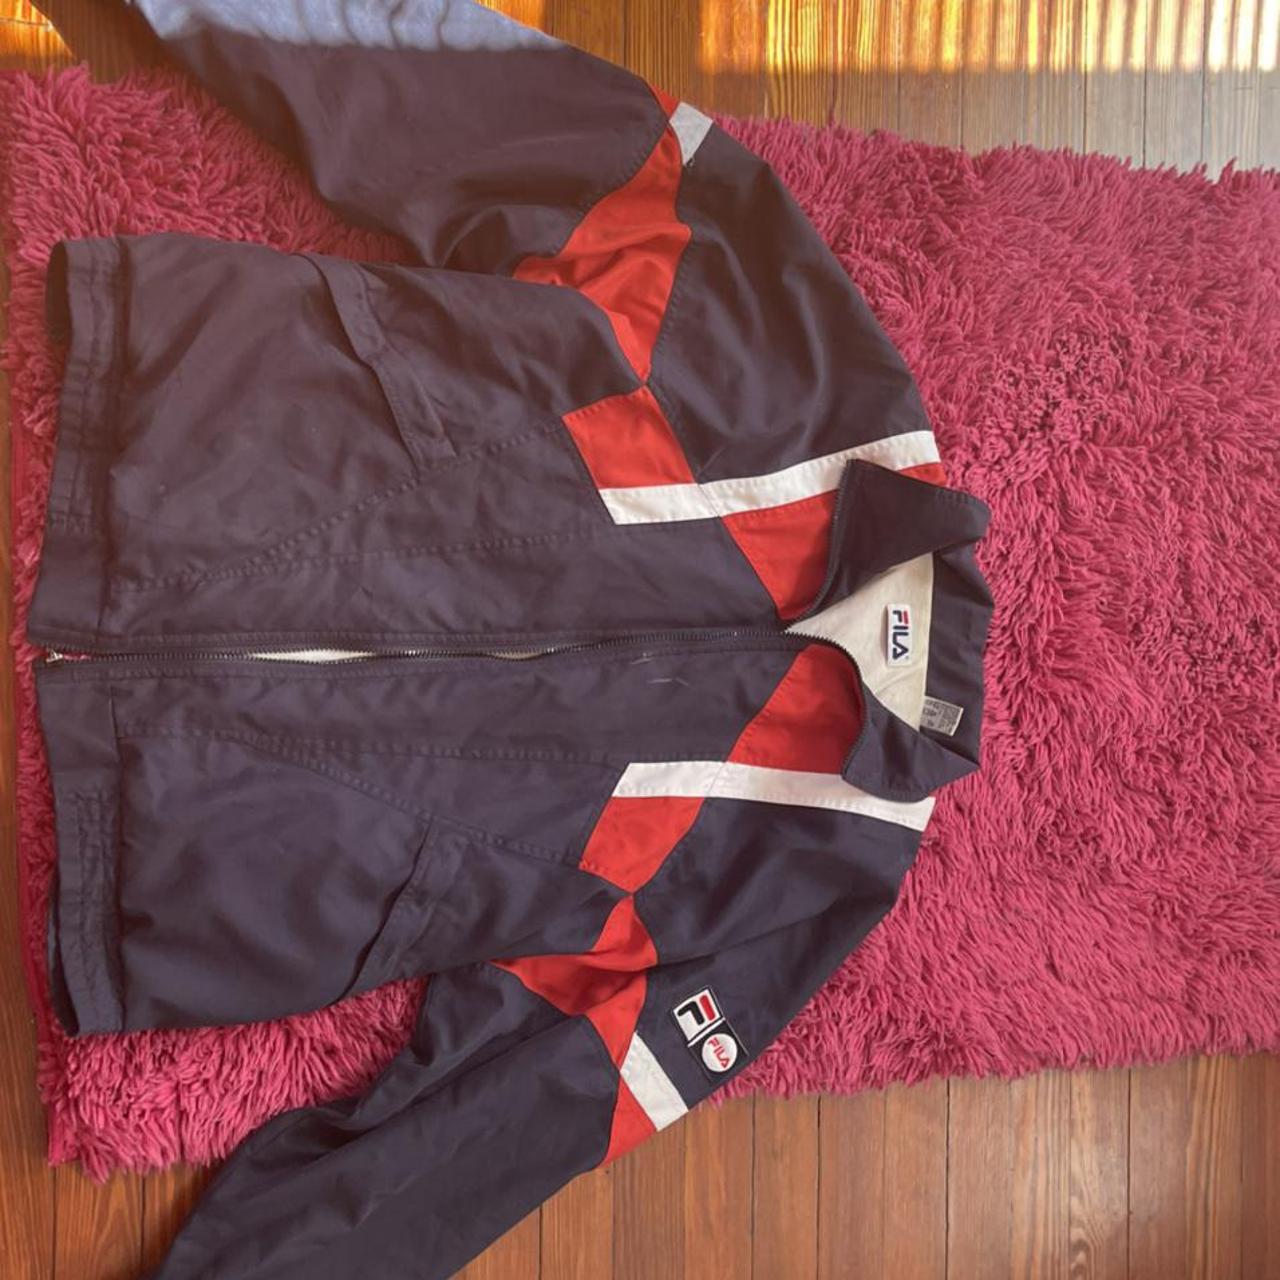 Fila Men's Navy and Red Jacket (2)